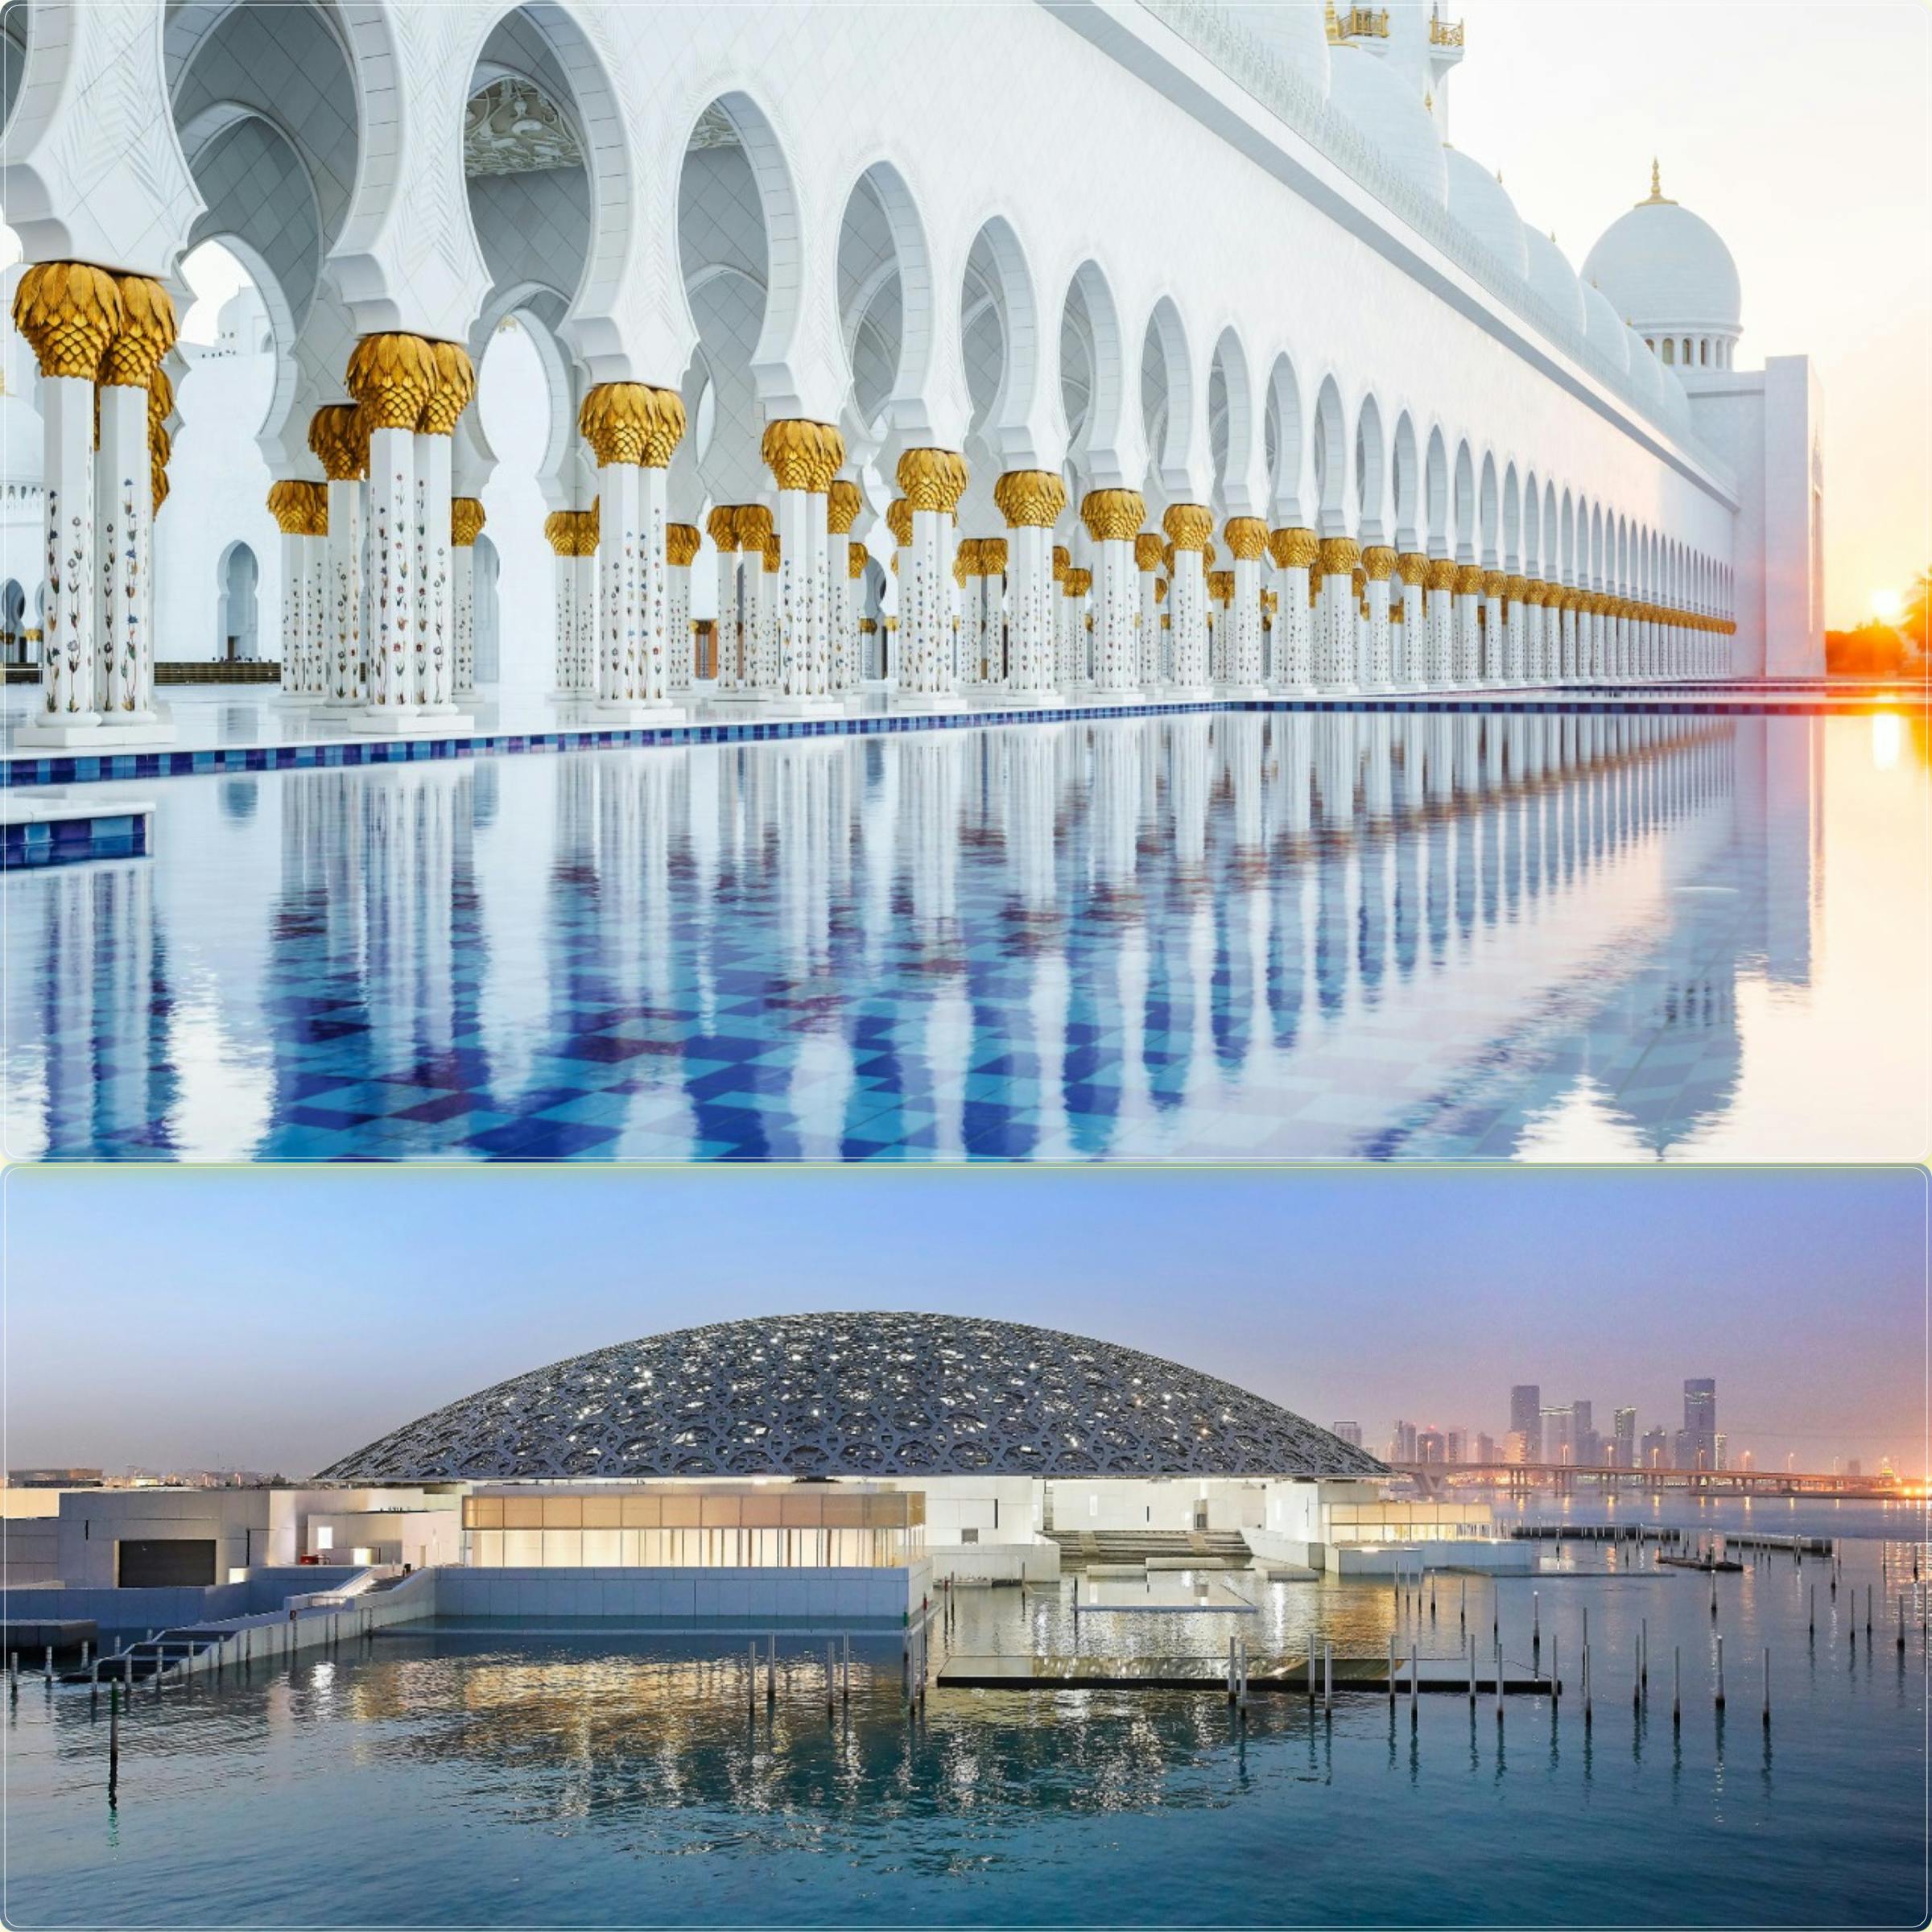 Abu Dhabi Louvre Museum and Sheikh Zayed Grand Mosque day trip from Dubai